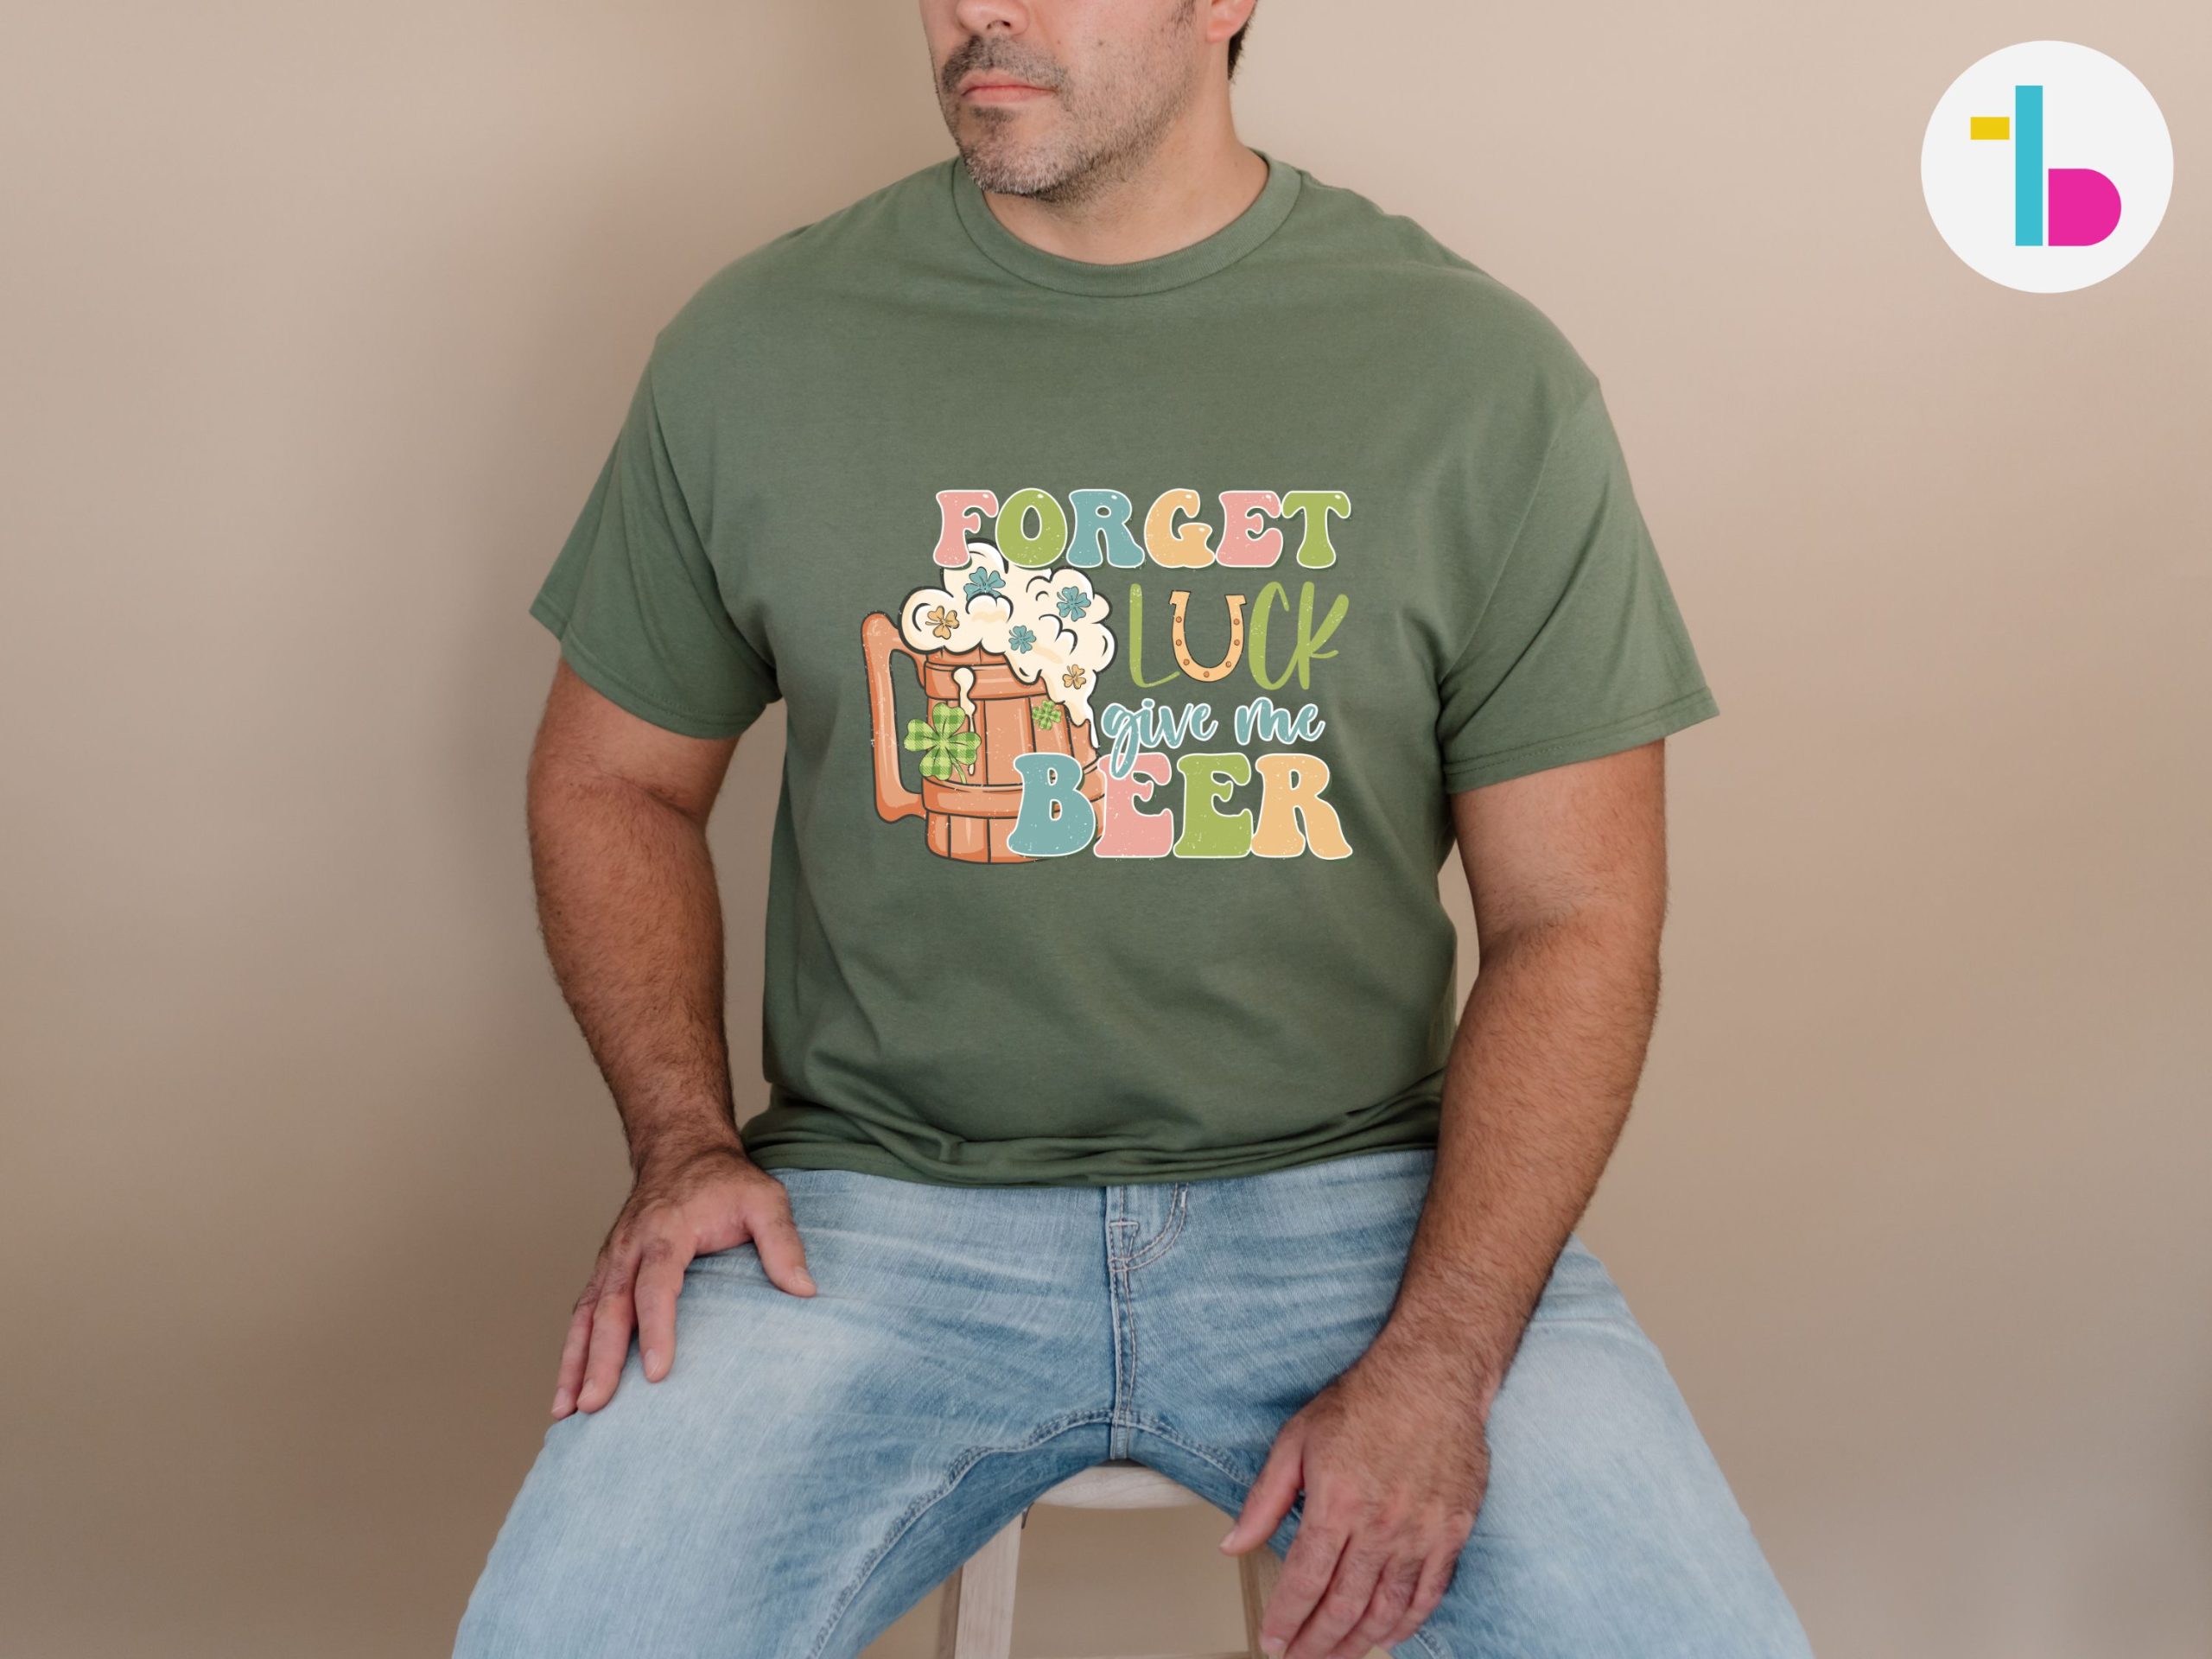 Forget luck give me beer shirt, Funny retro Irish shirt, Beer lover gift